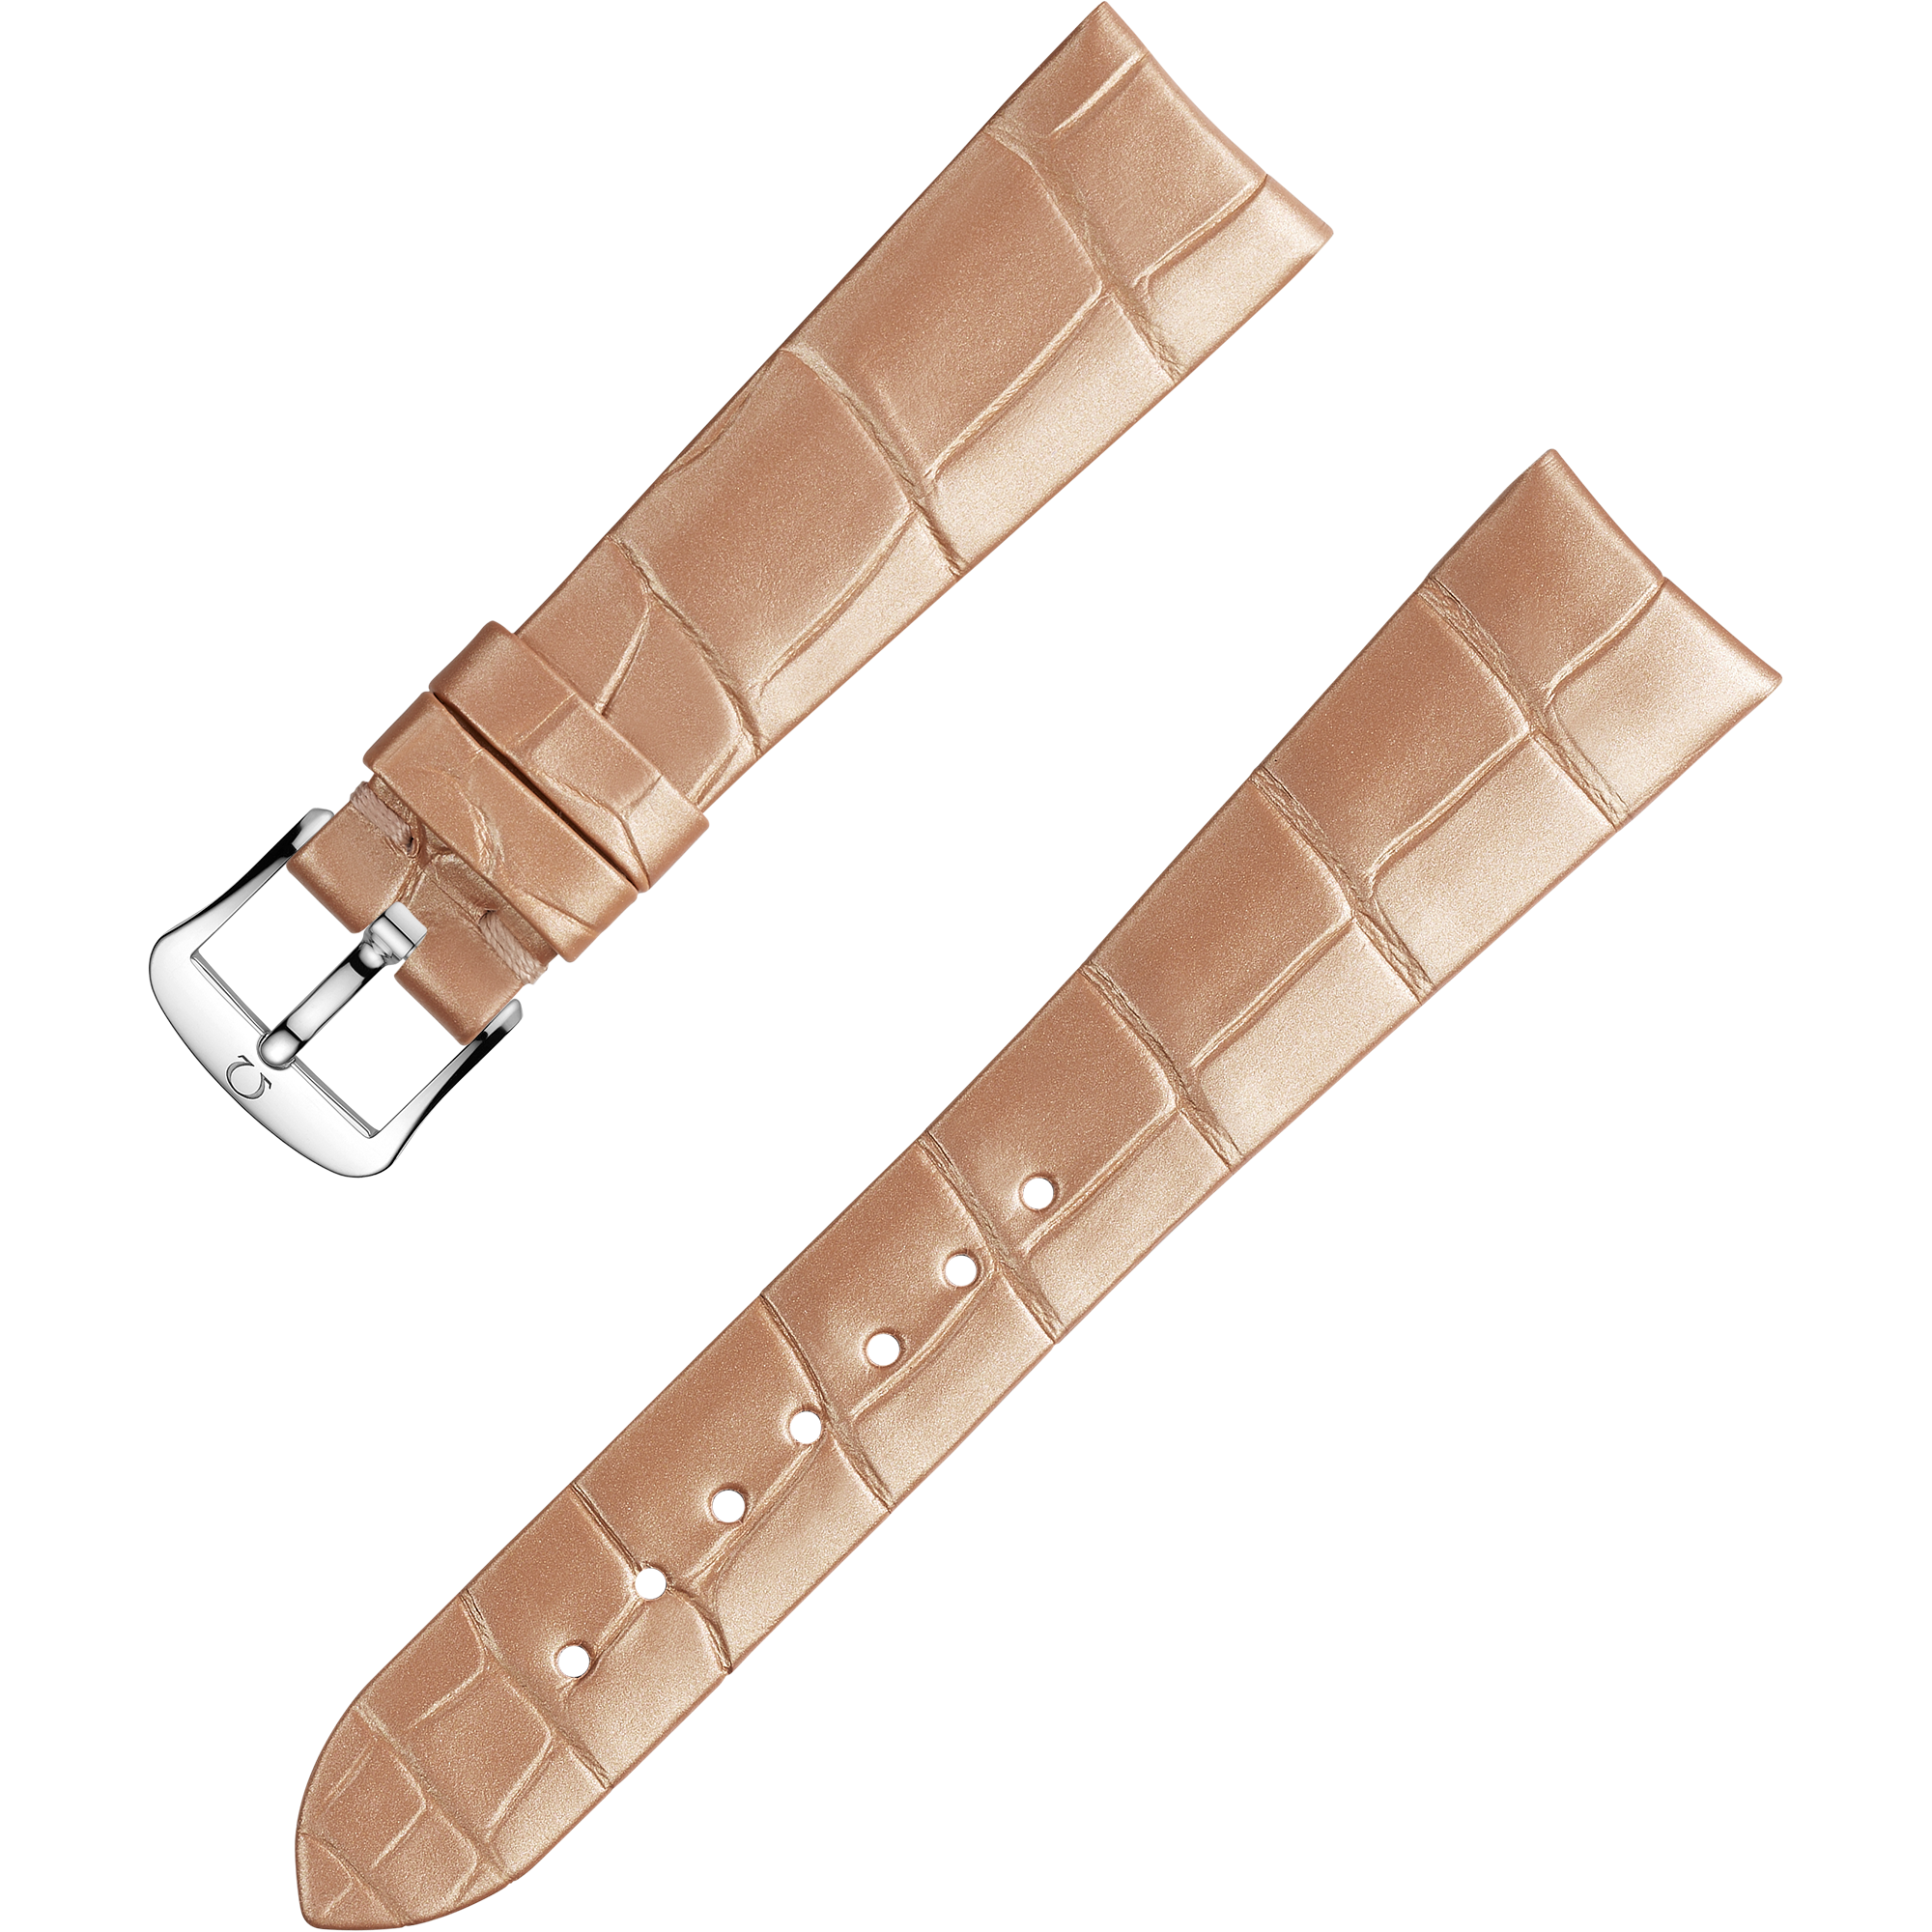 Two-piece strap - Shiny beige alligator leather strap with pin buckle - 032CUZ013034